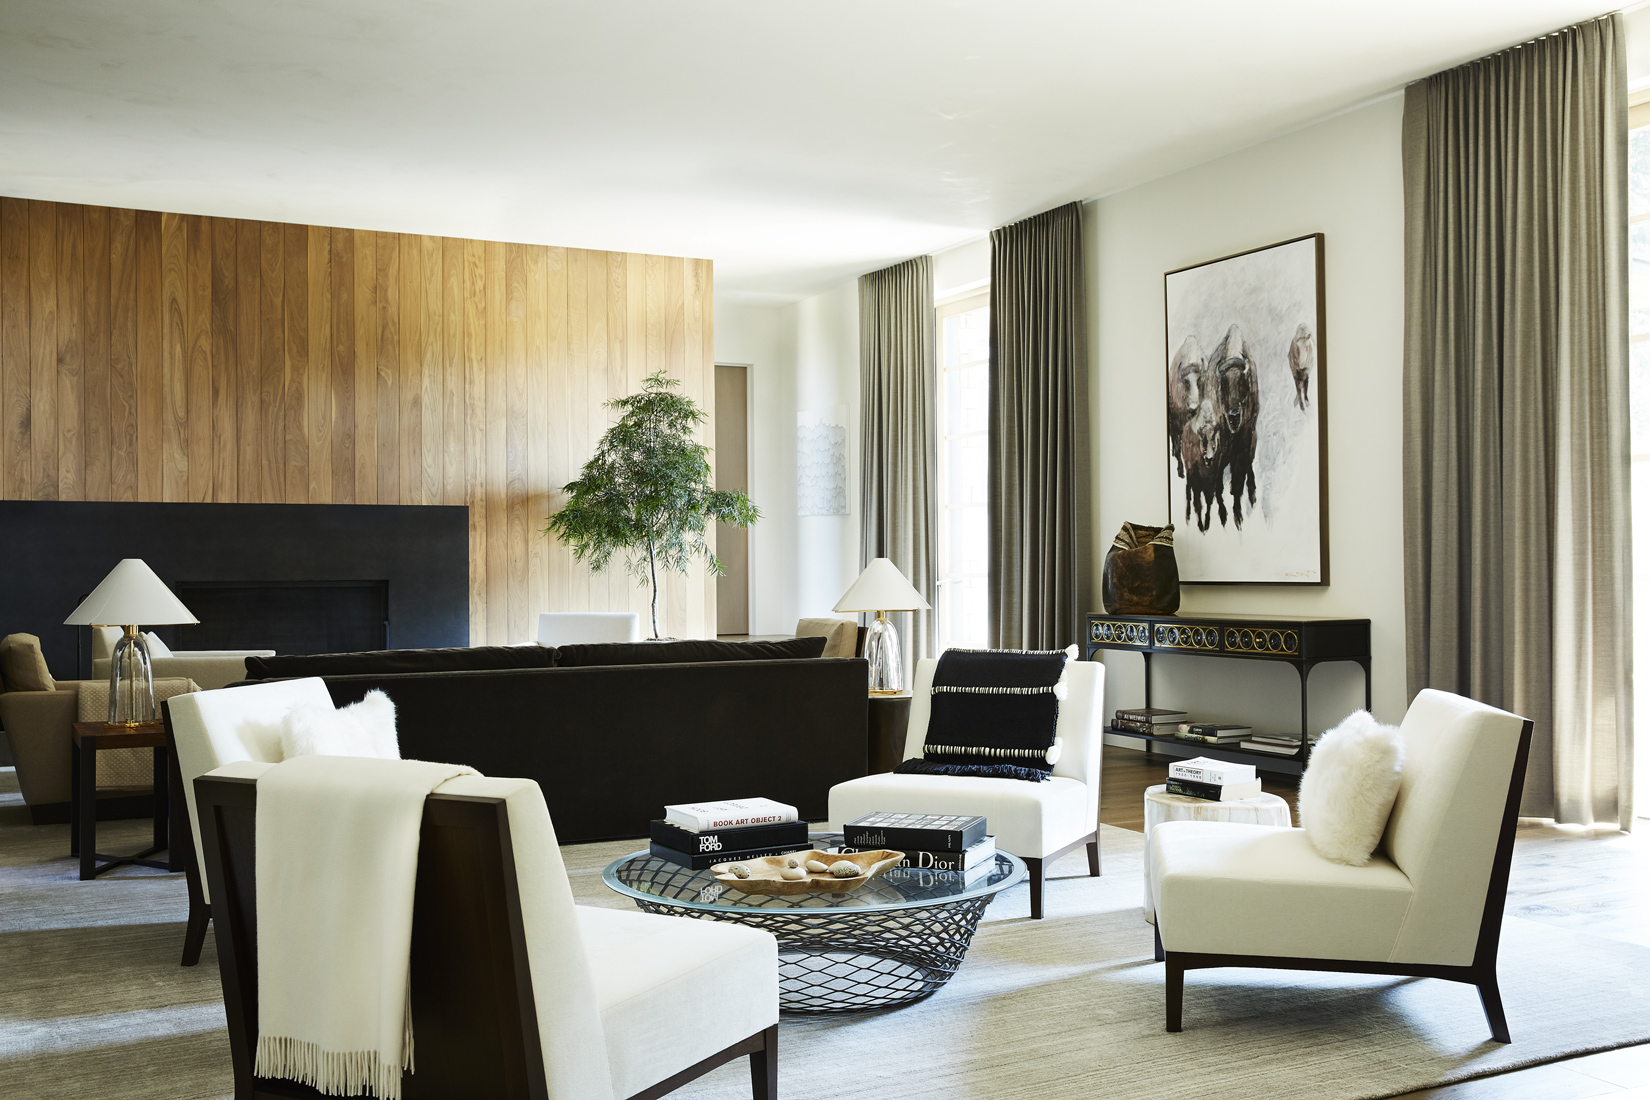 Featured in “Natural Elegance,” this WRJ Jackson Hole home deftly combines art with sleek-lined furnishings in luxurious textures (photo by William Abranowicz).